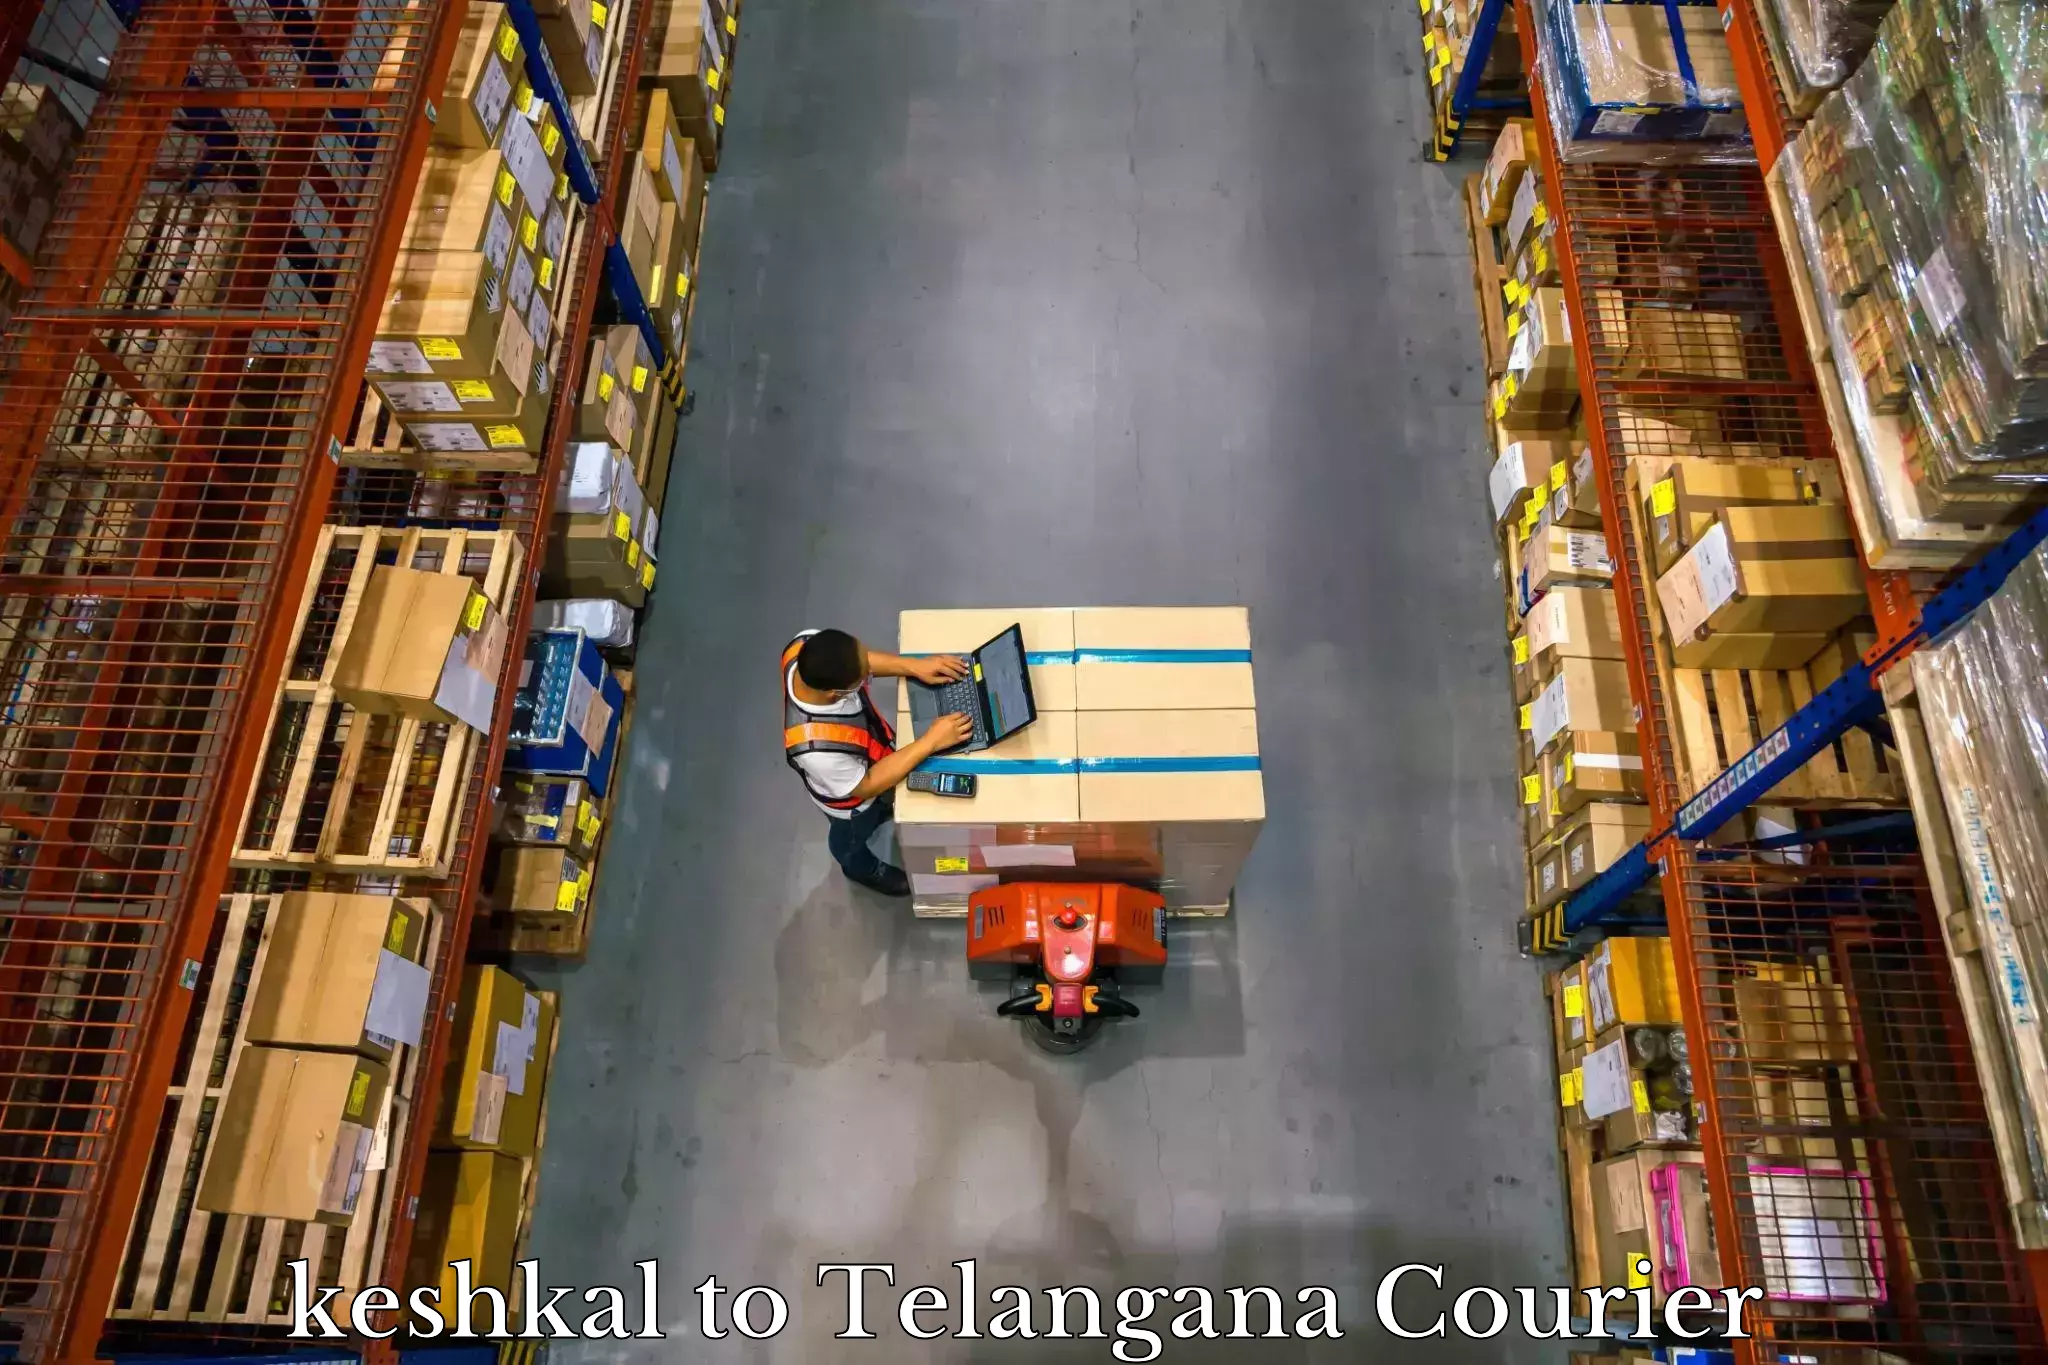 Luggage shipping service keshkal to Manneguda